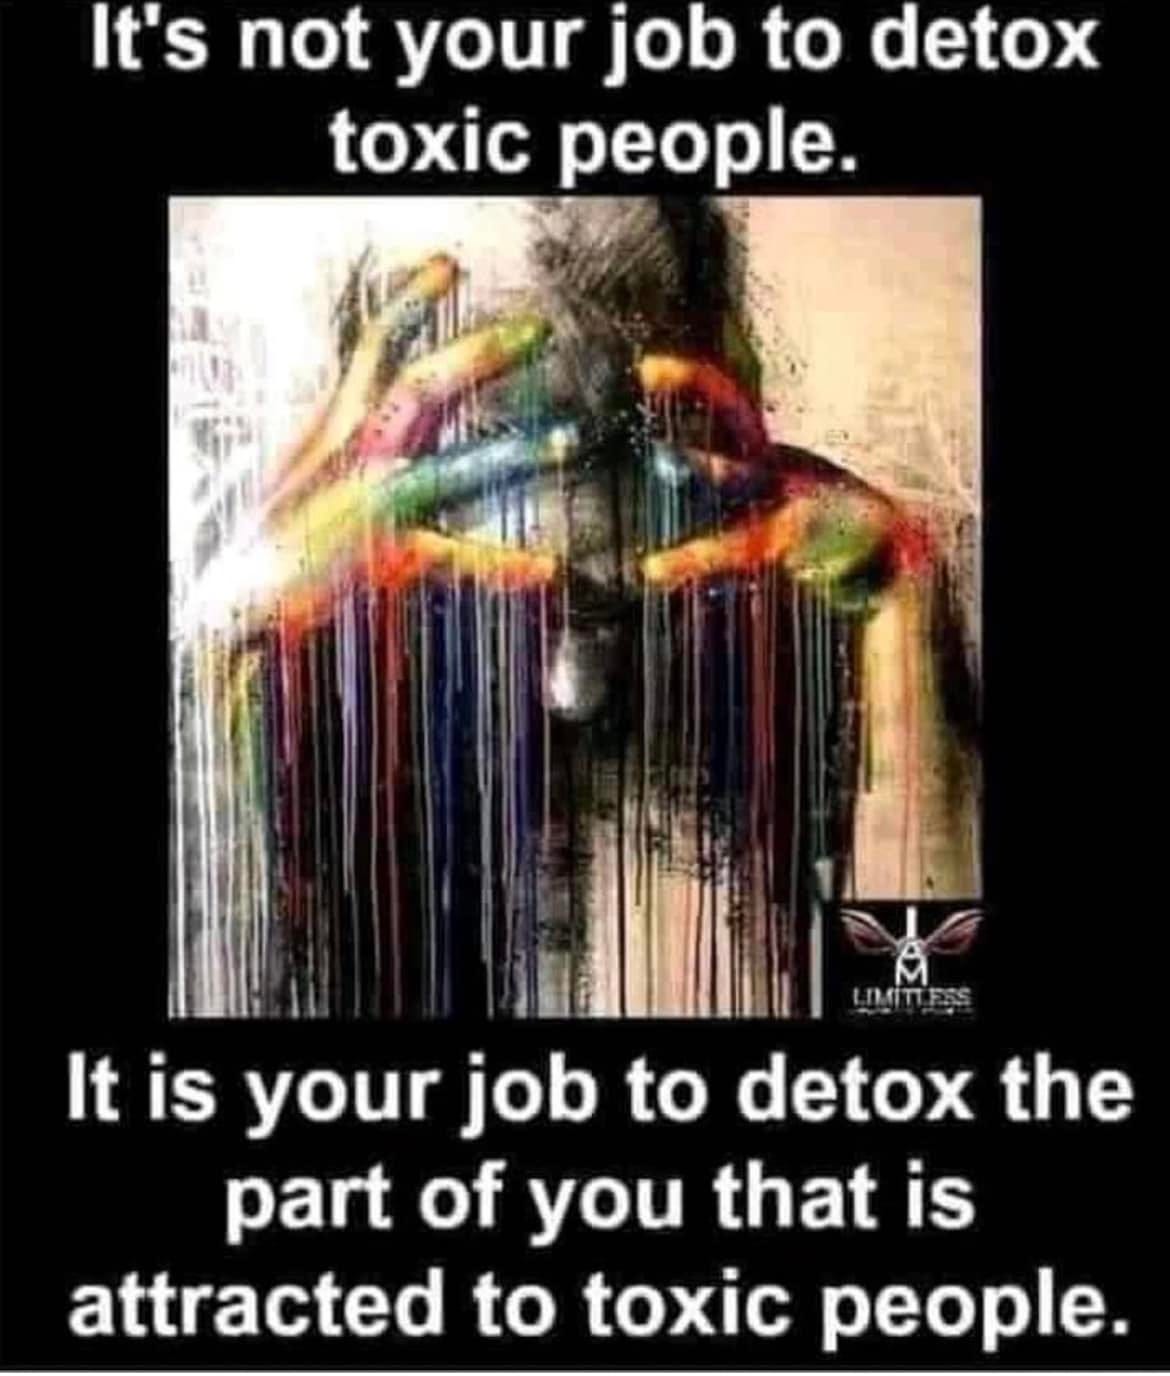 May be an image of text that says 'It's not your job to detox toxic people. LIMITLERS It is your job to detox the part of you that is attracted to toxic people.'